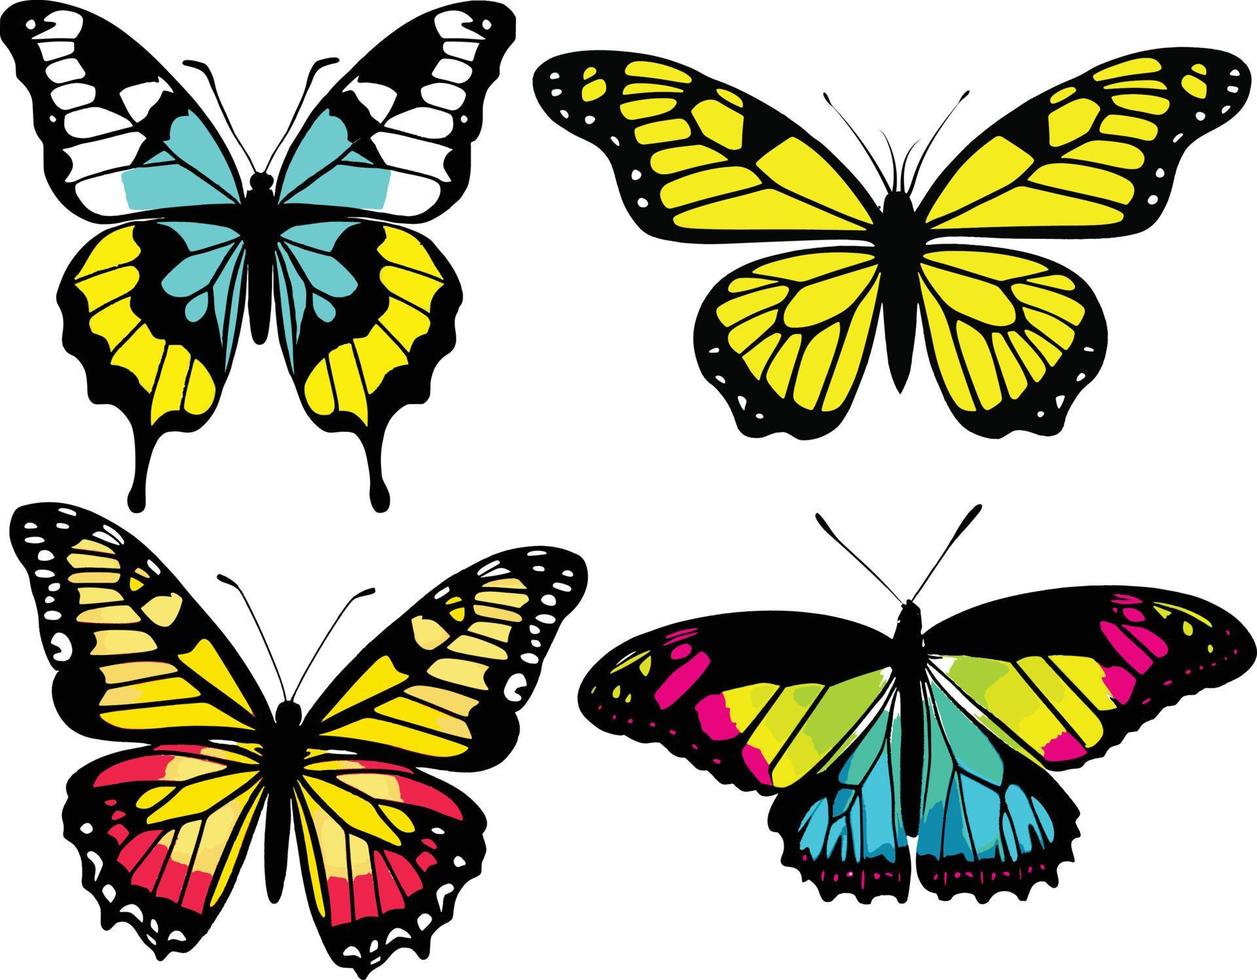 Beautiful Butterfly Vector Art. This is an Editable and Printable vector file